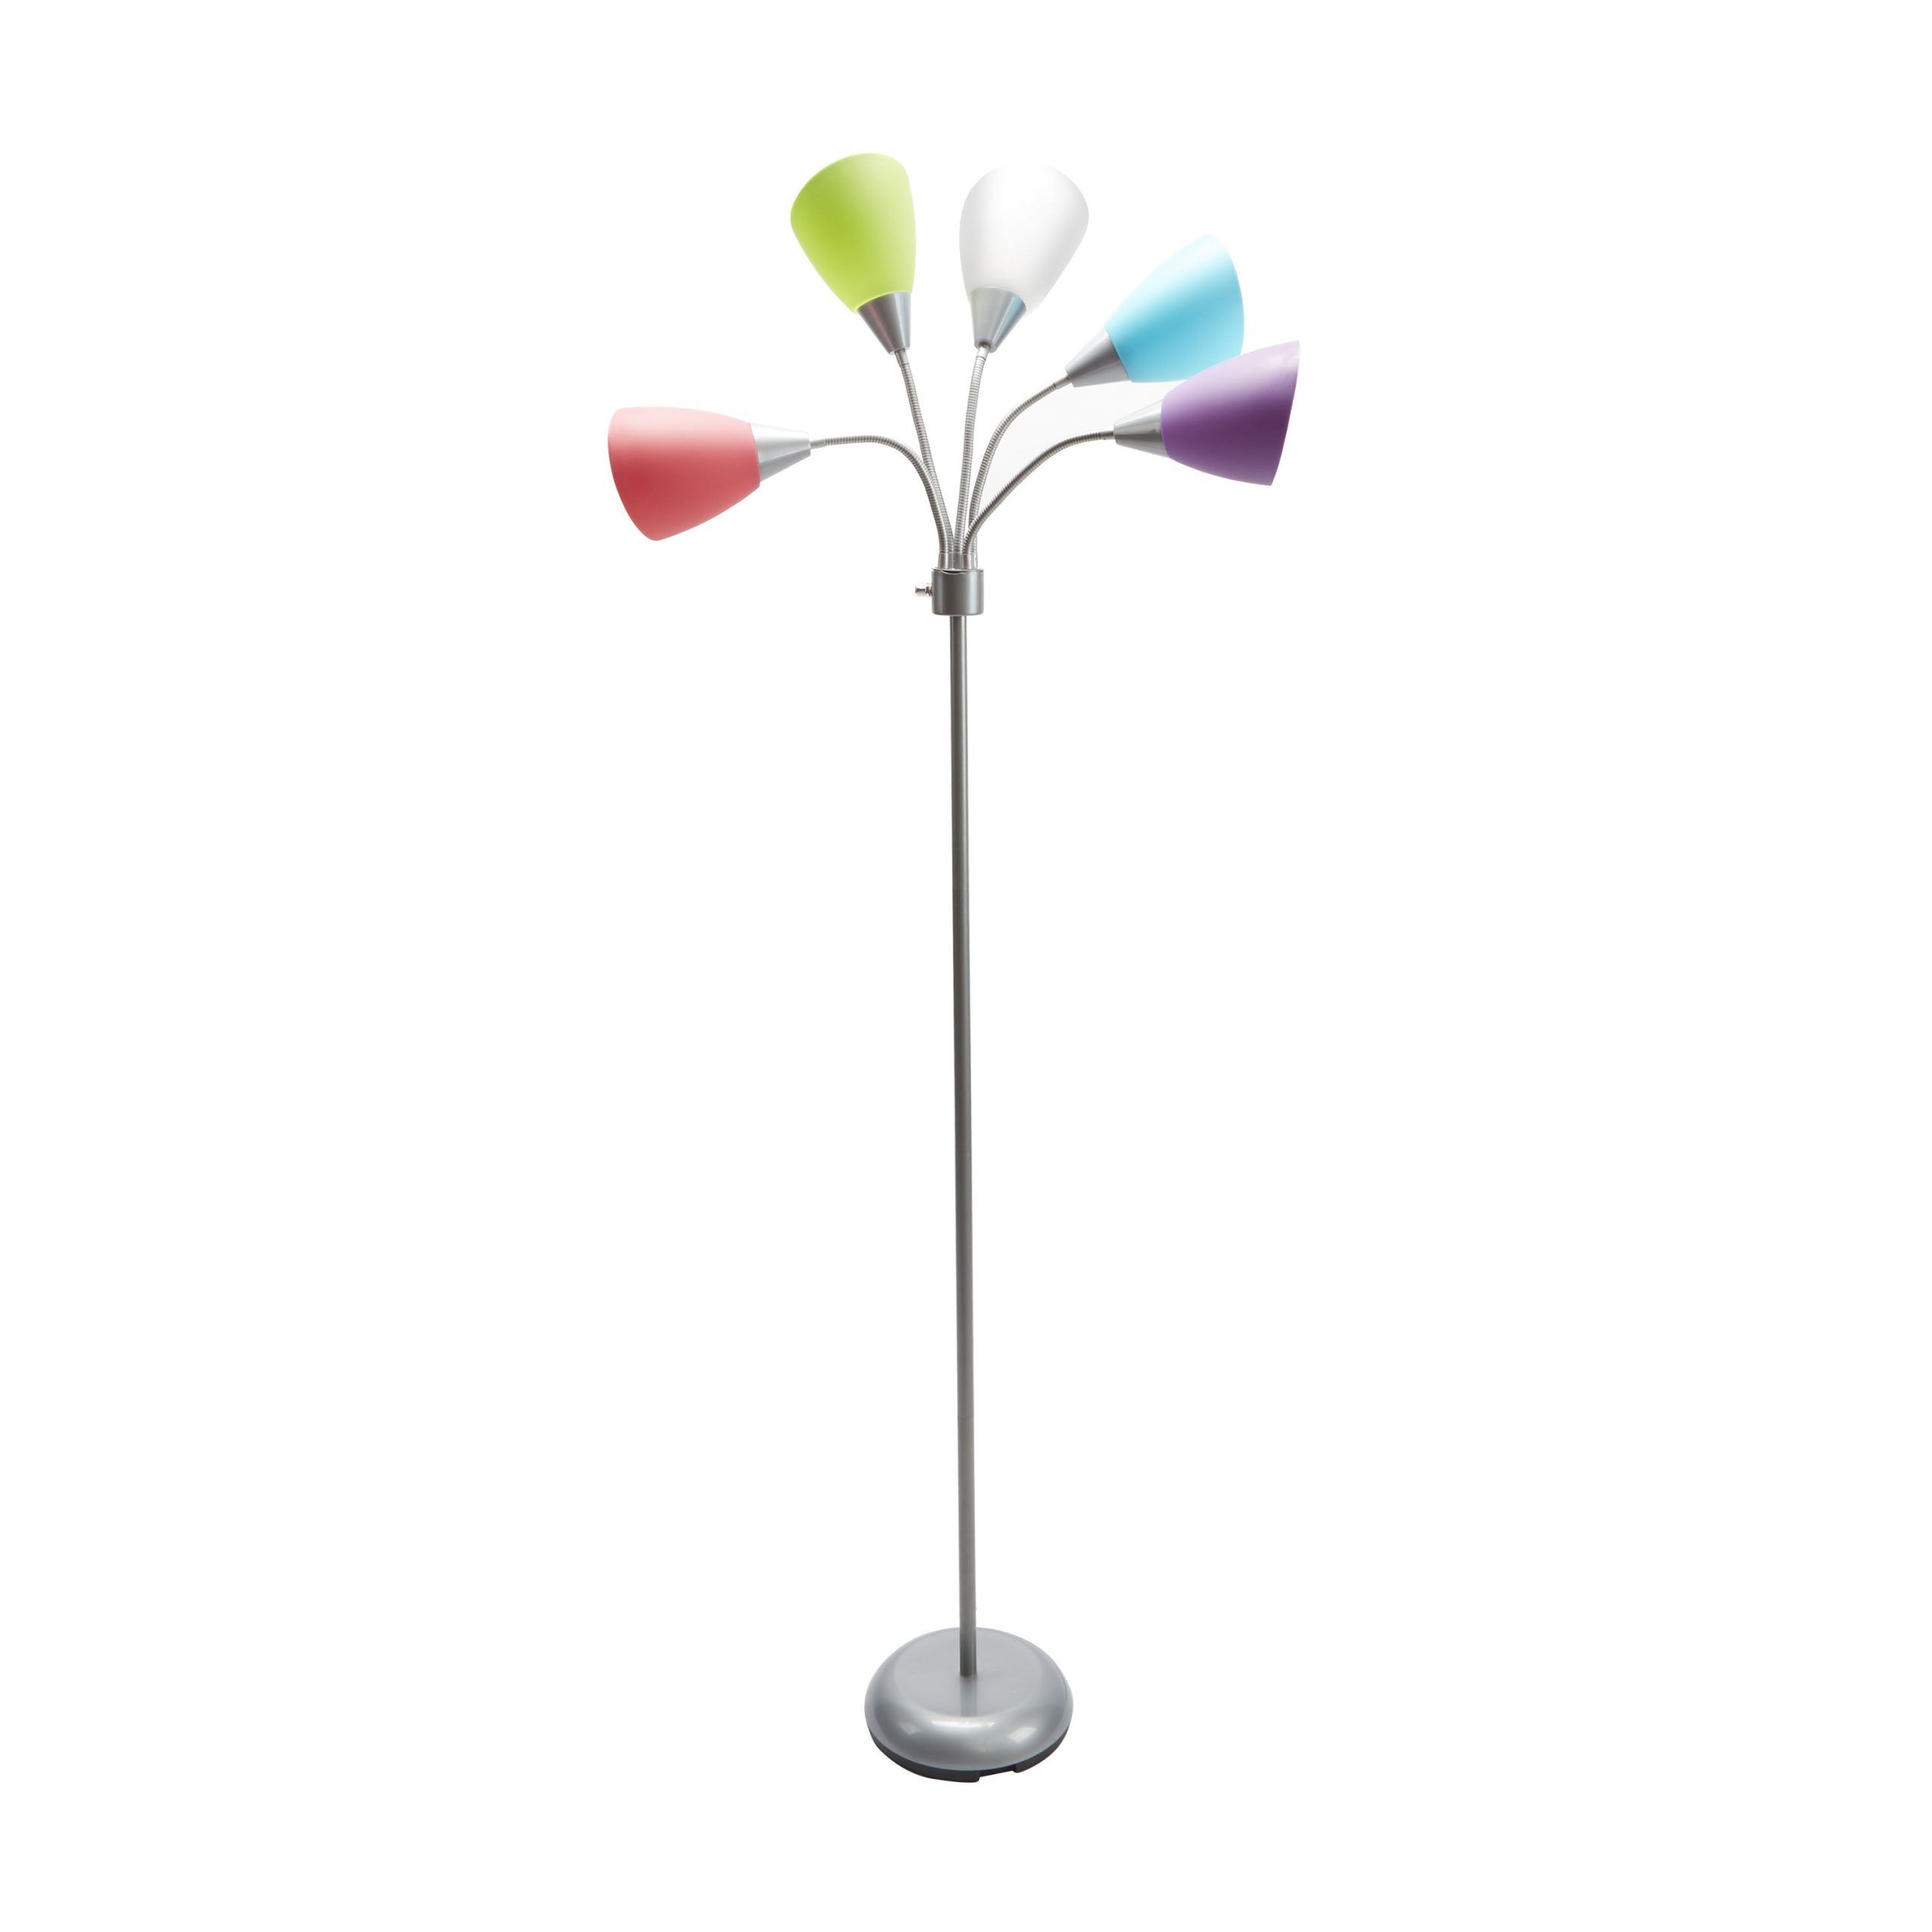 5 Light Standing Lamps With Regard To Popular Mainstays 5 Light Floor Lamp, Silver Color With Multi Color Shades Made Of  Metal – Walmart (View 9 of 10)